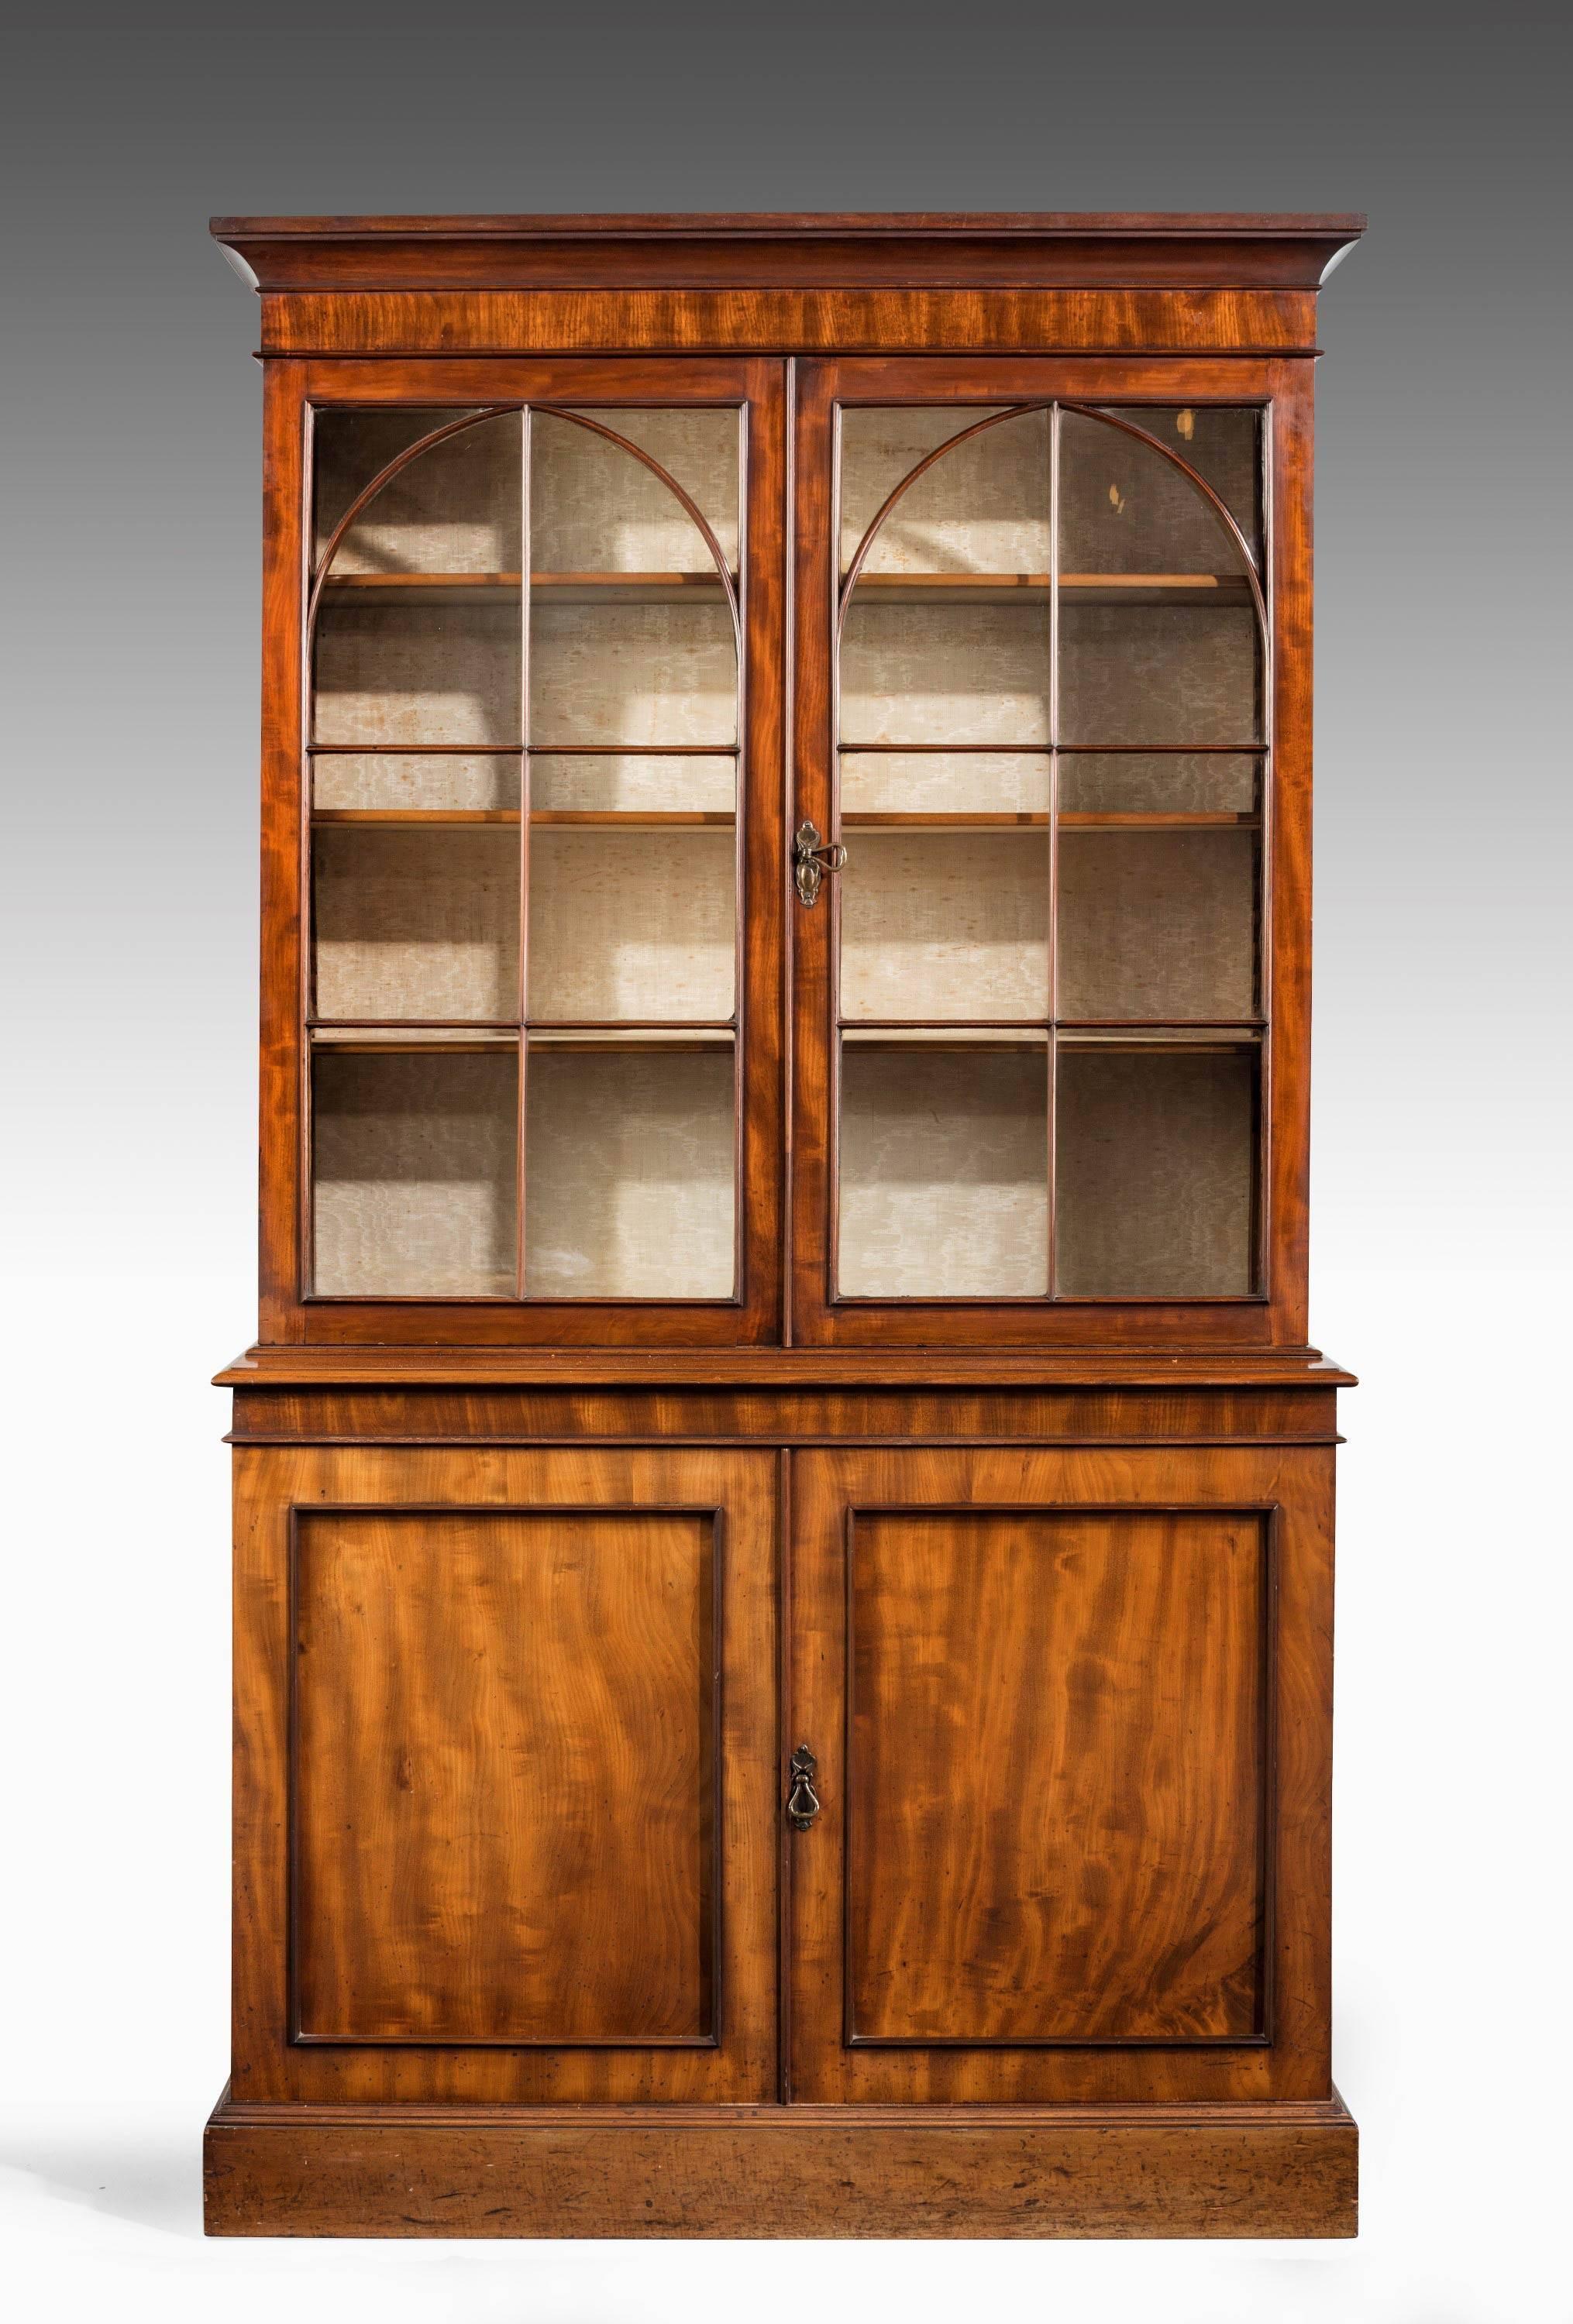 A Regency period mahogany bookcase. The glazed top section with slight Gothic tracery. The base well figured with left and right hand matching panels.